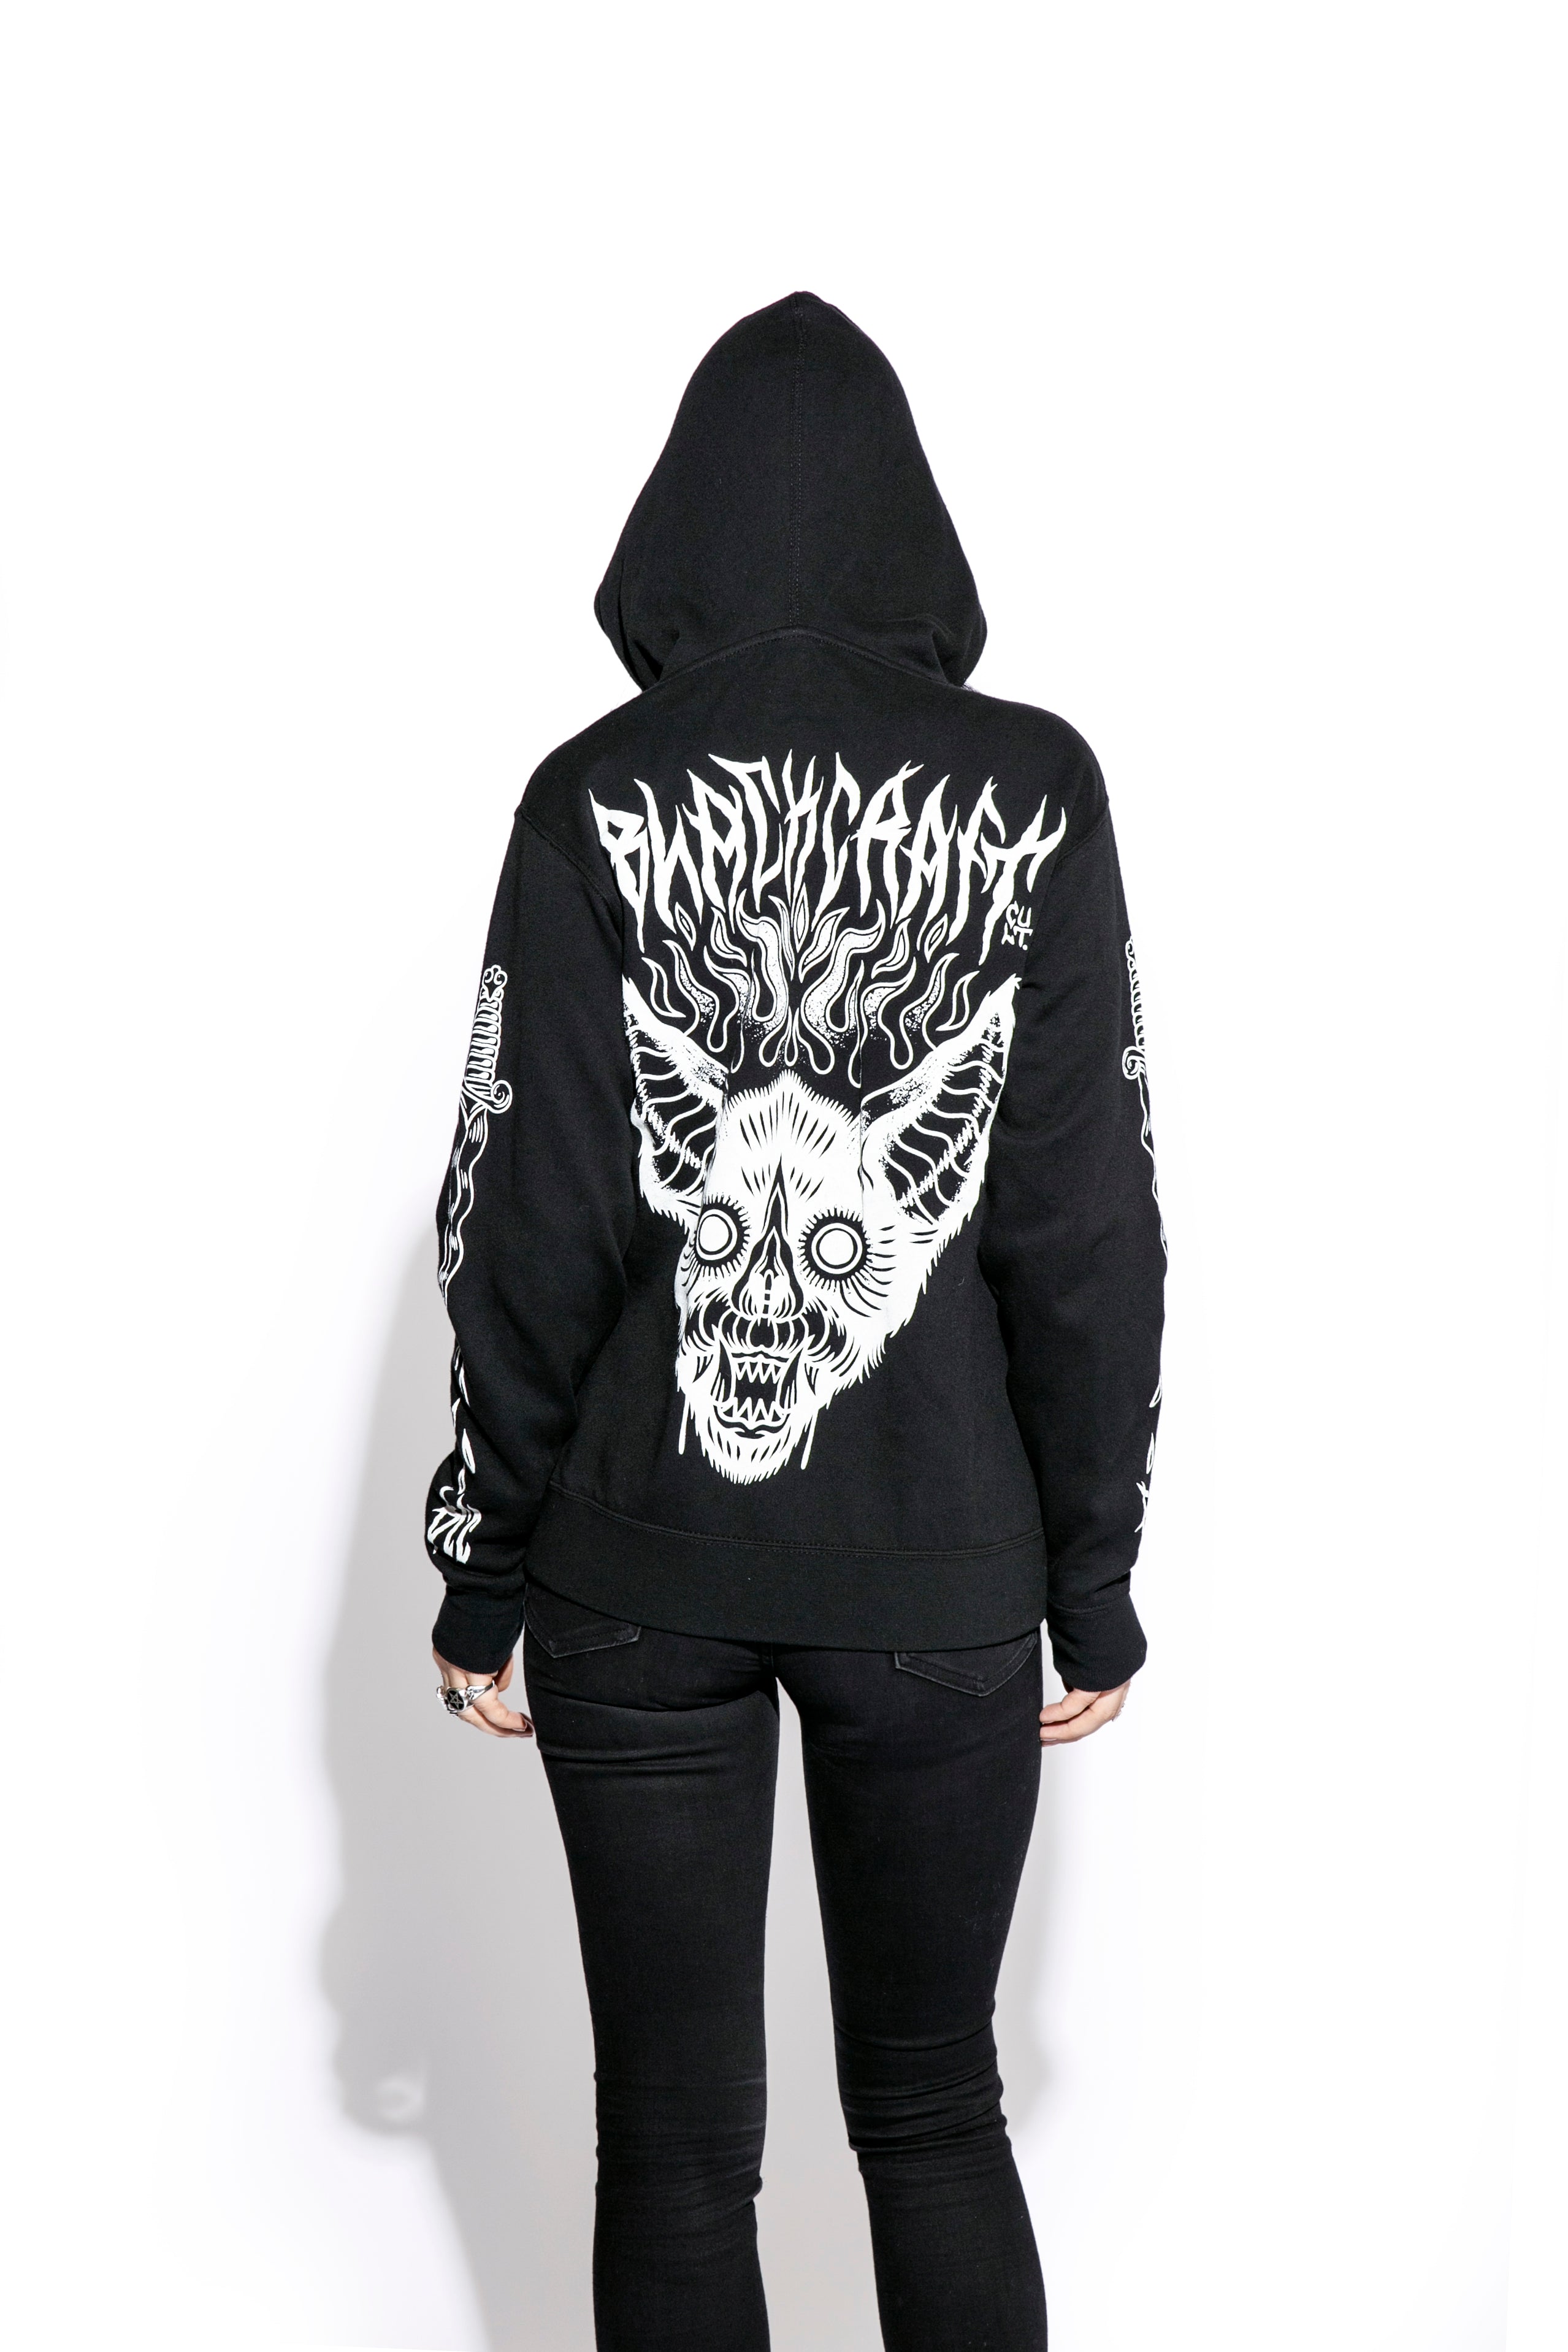 Deathbringer - Hooded Pullover Sweater